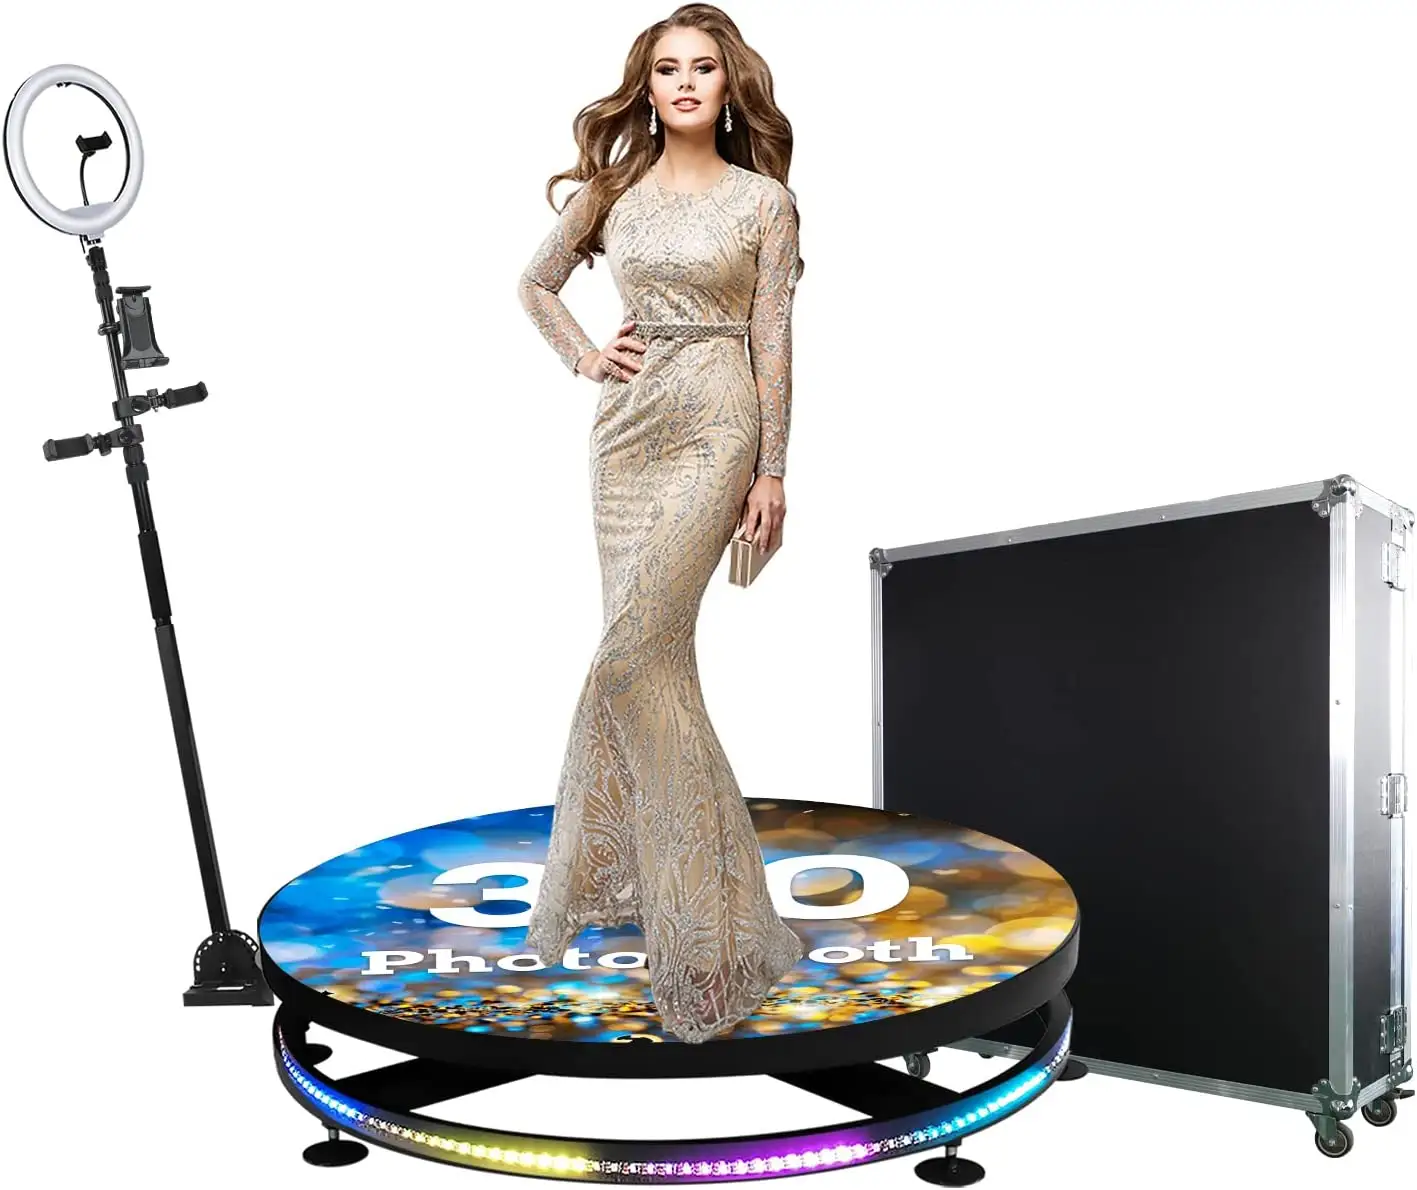 Trendy 360 camera photo booth accessories 360 video booth 100cm tempered glass led 360 rotating photo booth 360 115cm with case